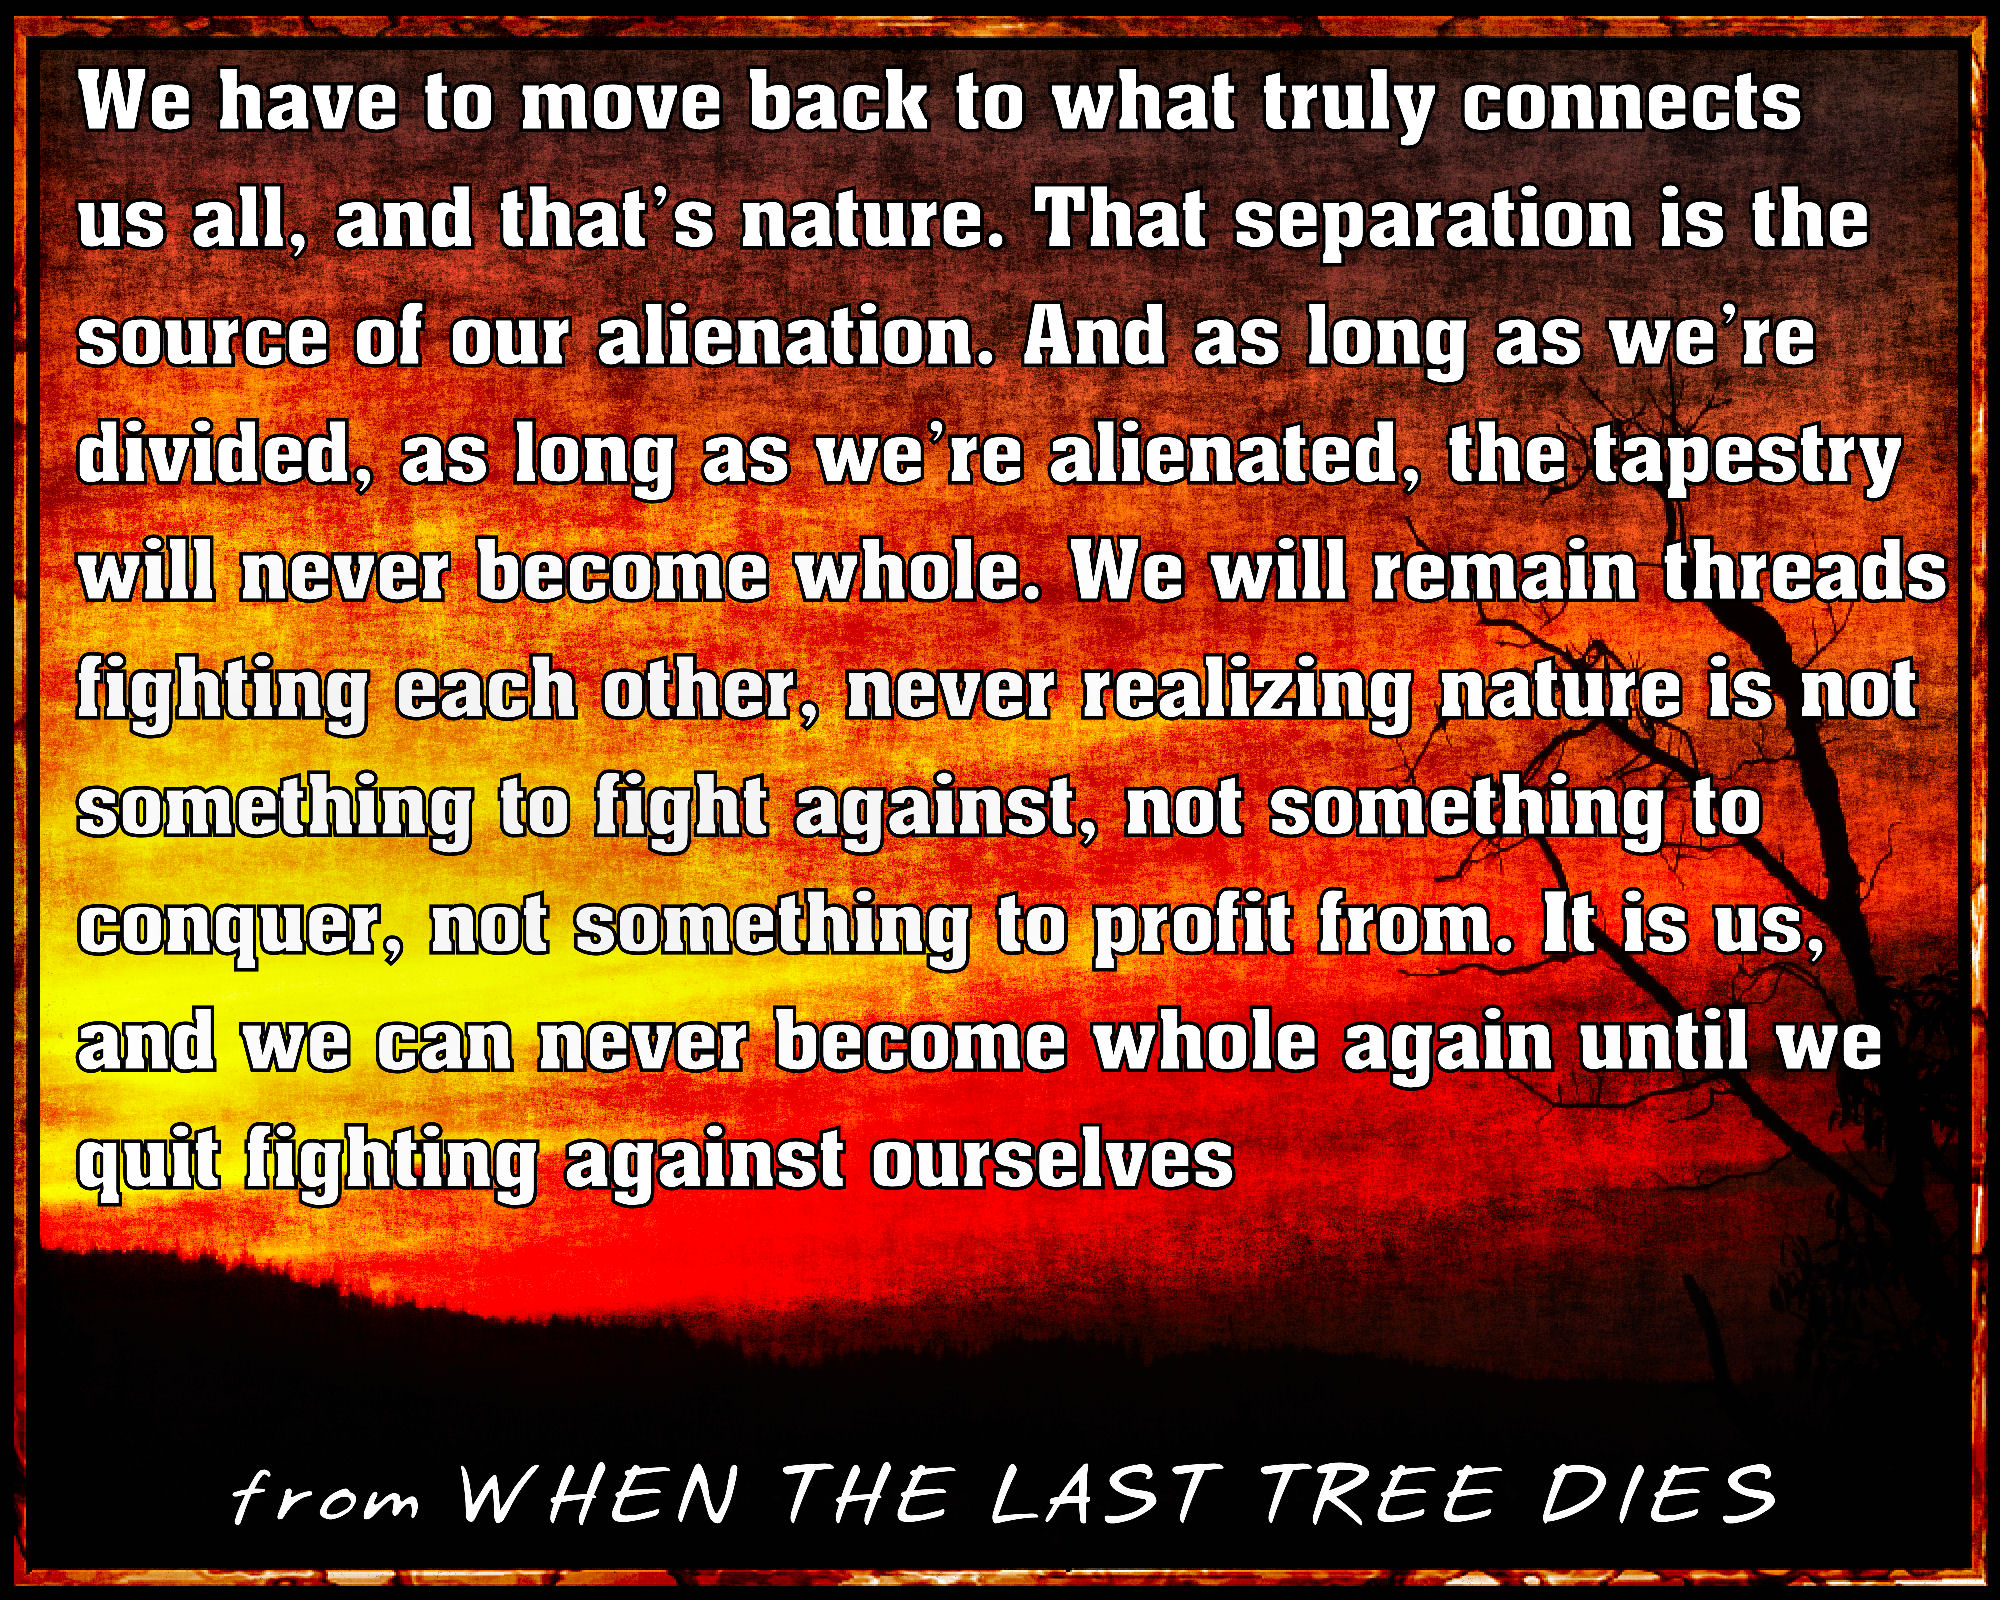 quote from Kate Taylor's dystopian fiction novel WHEN THE LAST TREE DIES, We have to move back to what truly connects us, and that's nature.